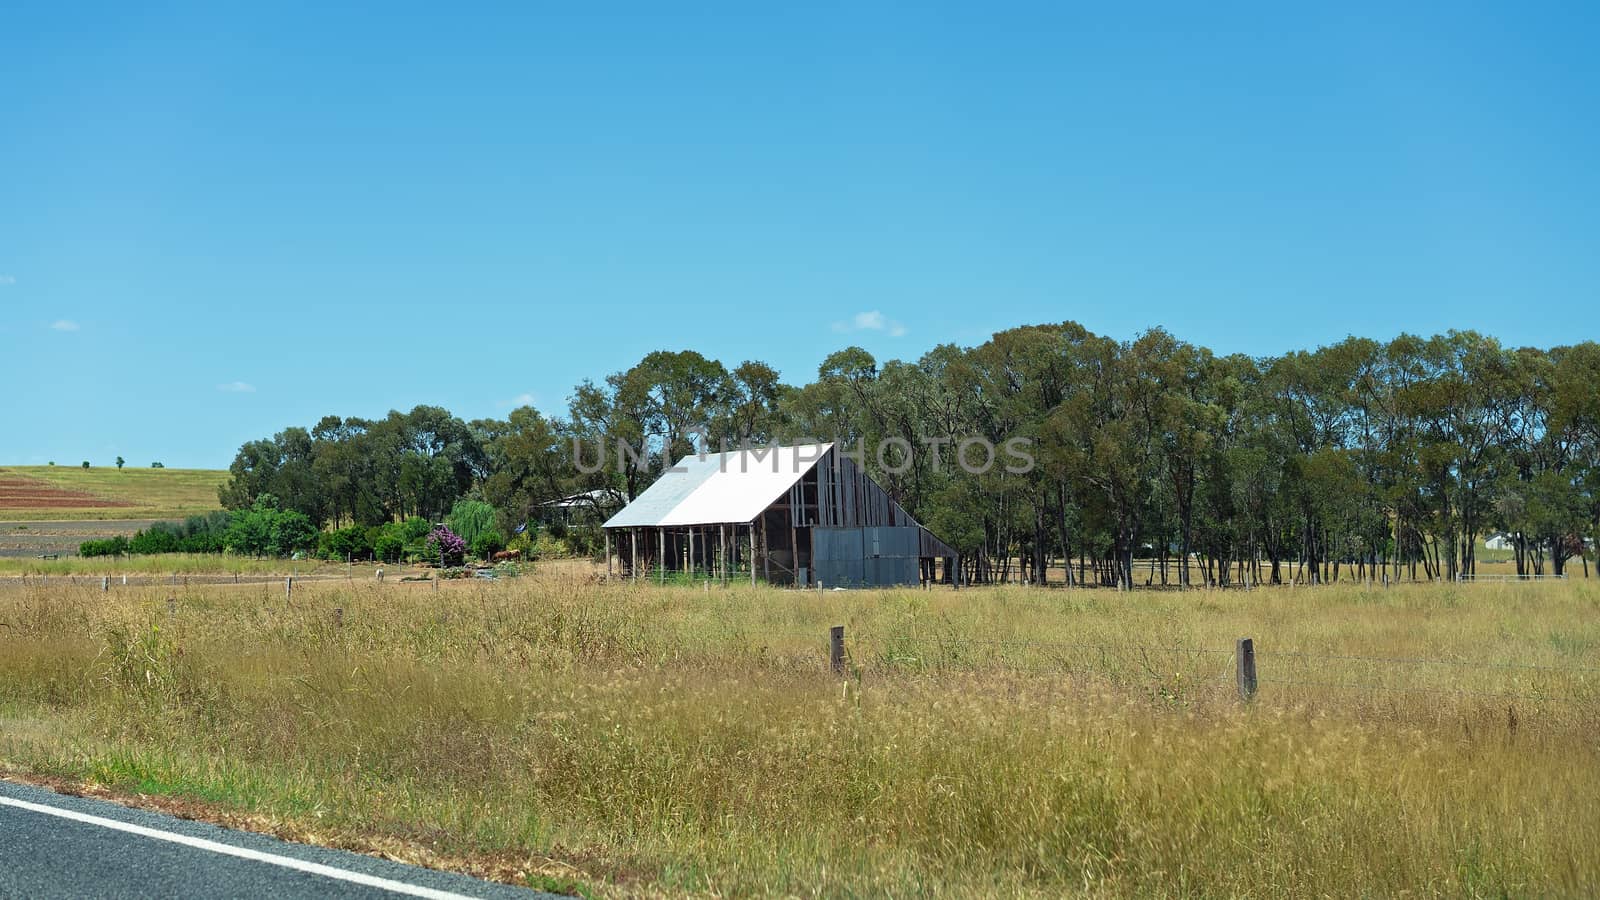 Old Timber Barn In The Australian Countryside by 	JacksonStock